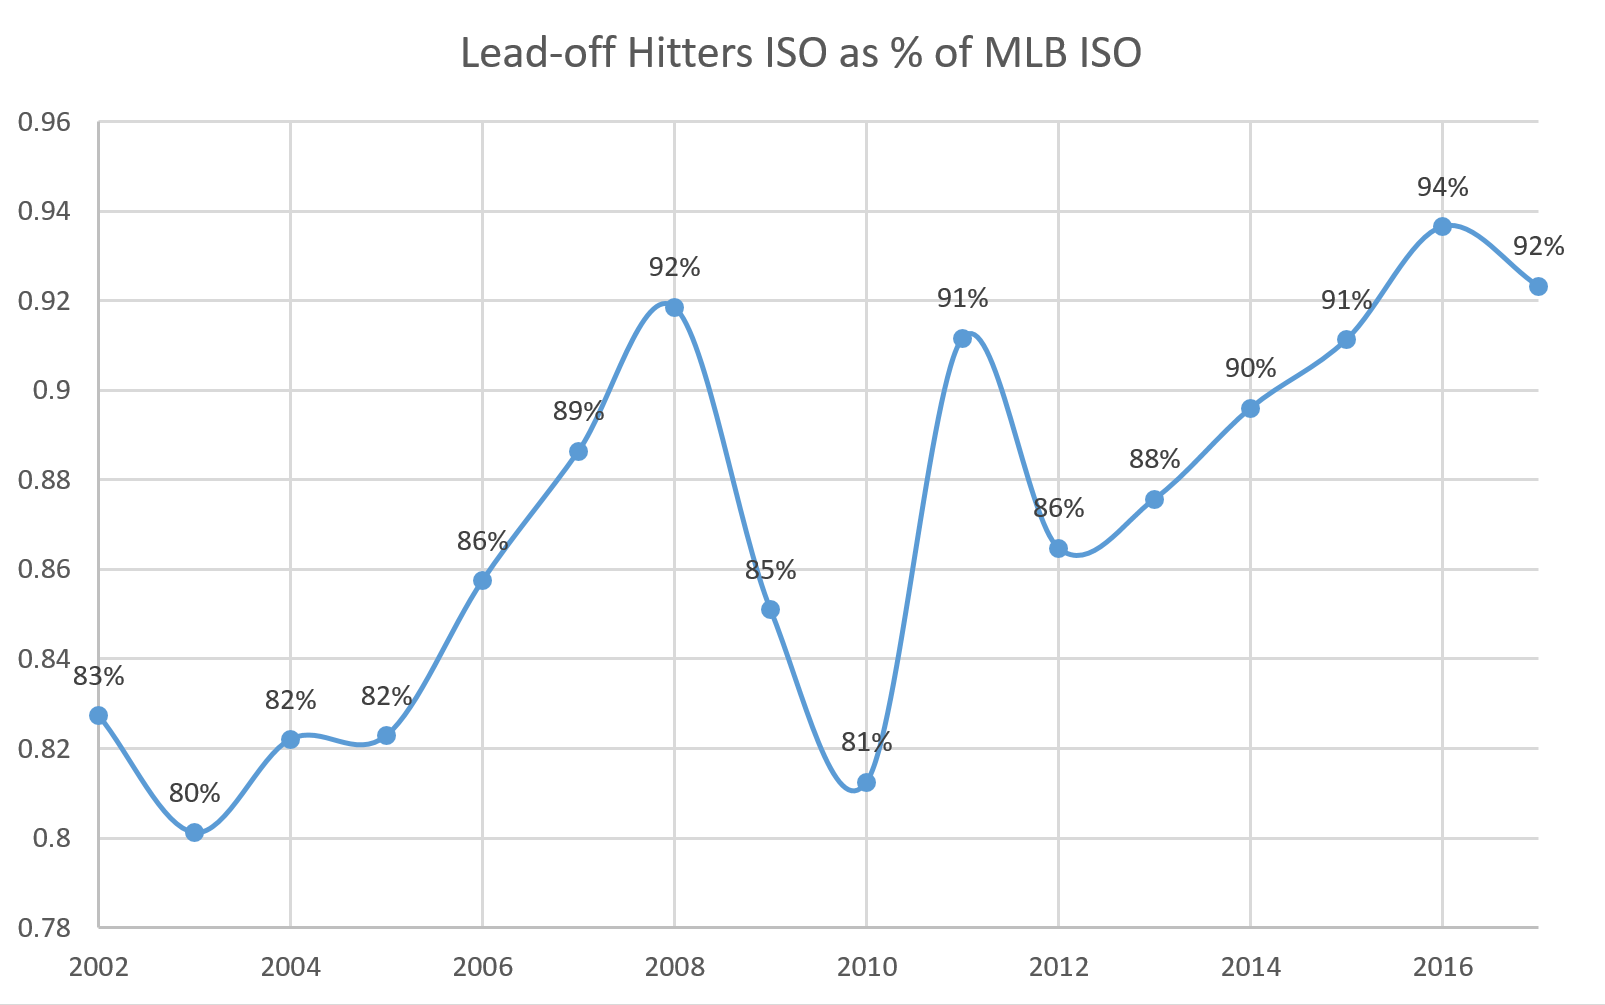 Lead-off hitters' ISO as a % of MLB ISO